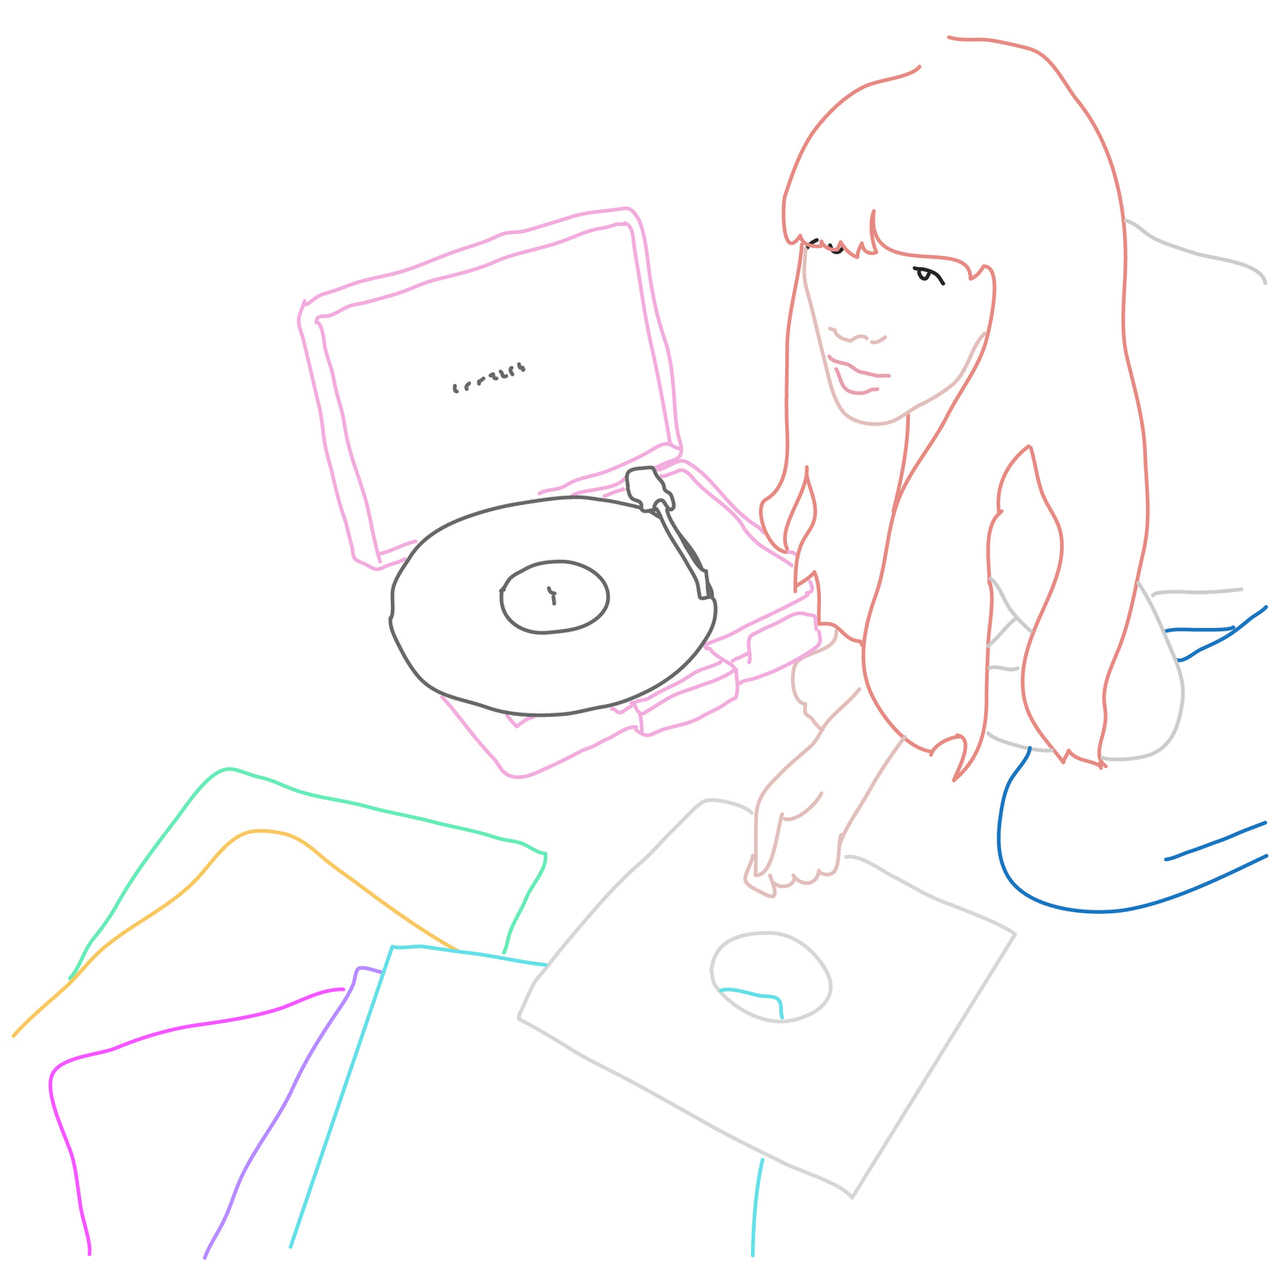 dj,vinyl,music,record spinning,art,vintage,illustration,style,drawing,colors,spin,records,record player,line drawing,emma darvick